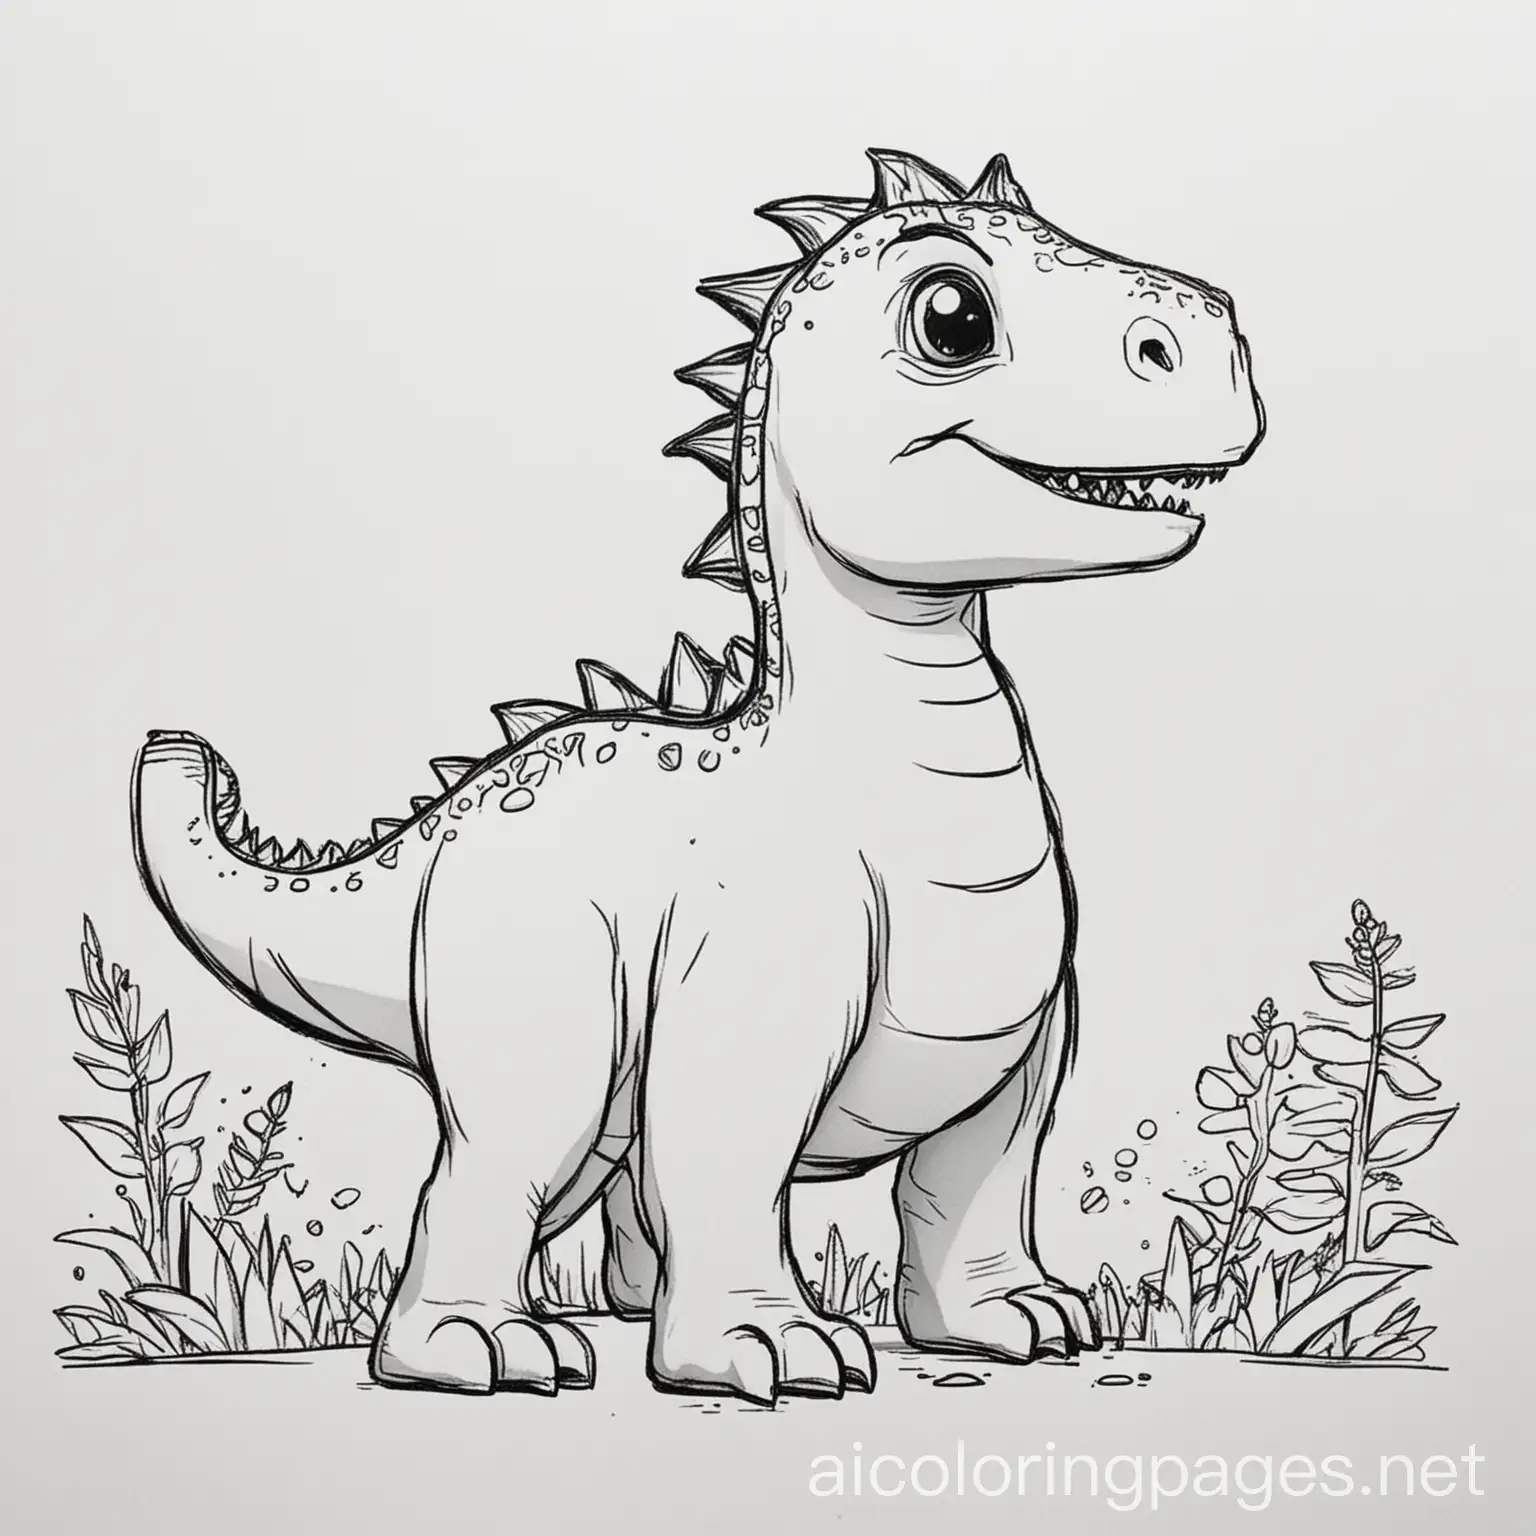 Simple-Dinosaur-Coloring-Page-with-Ample-White-Space